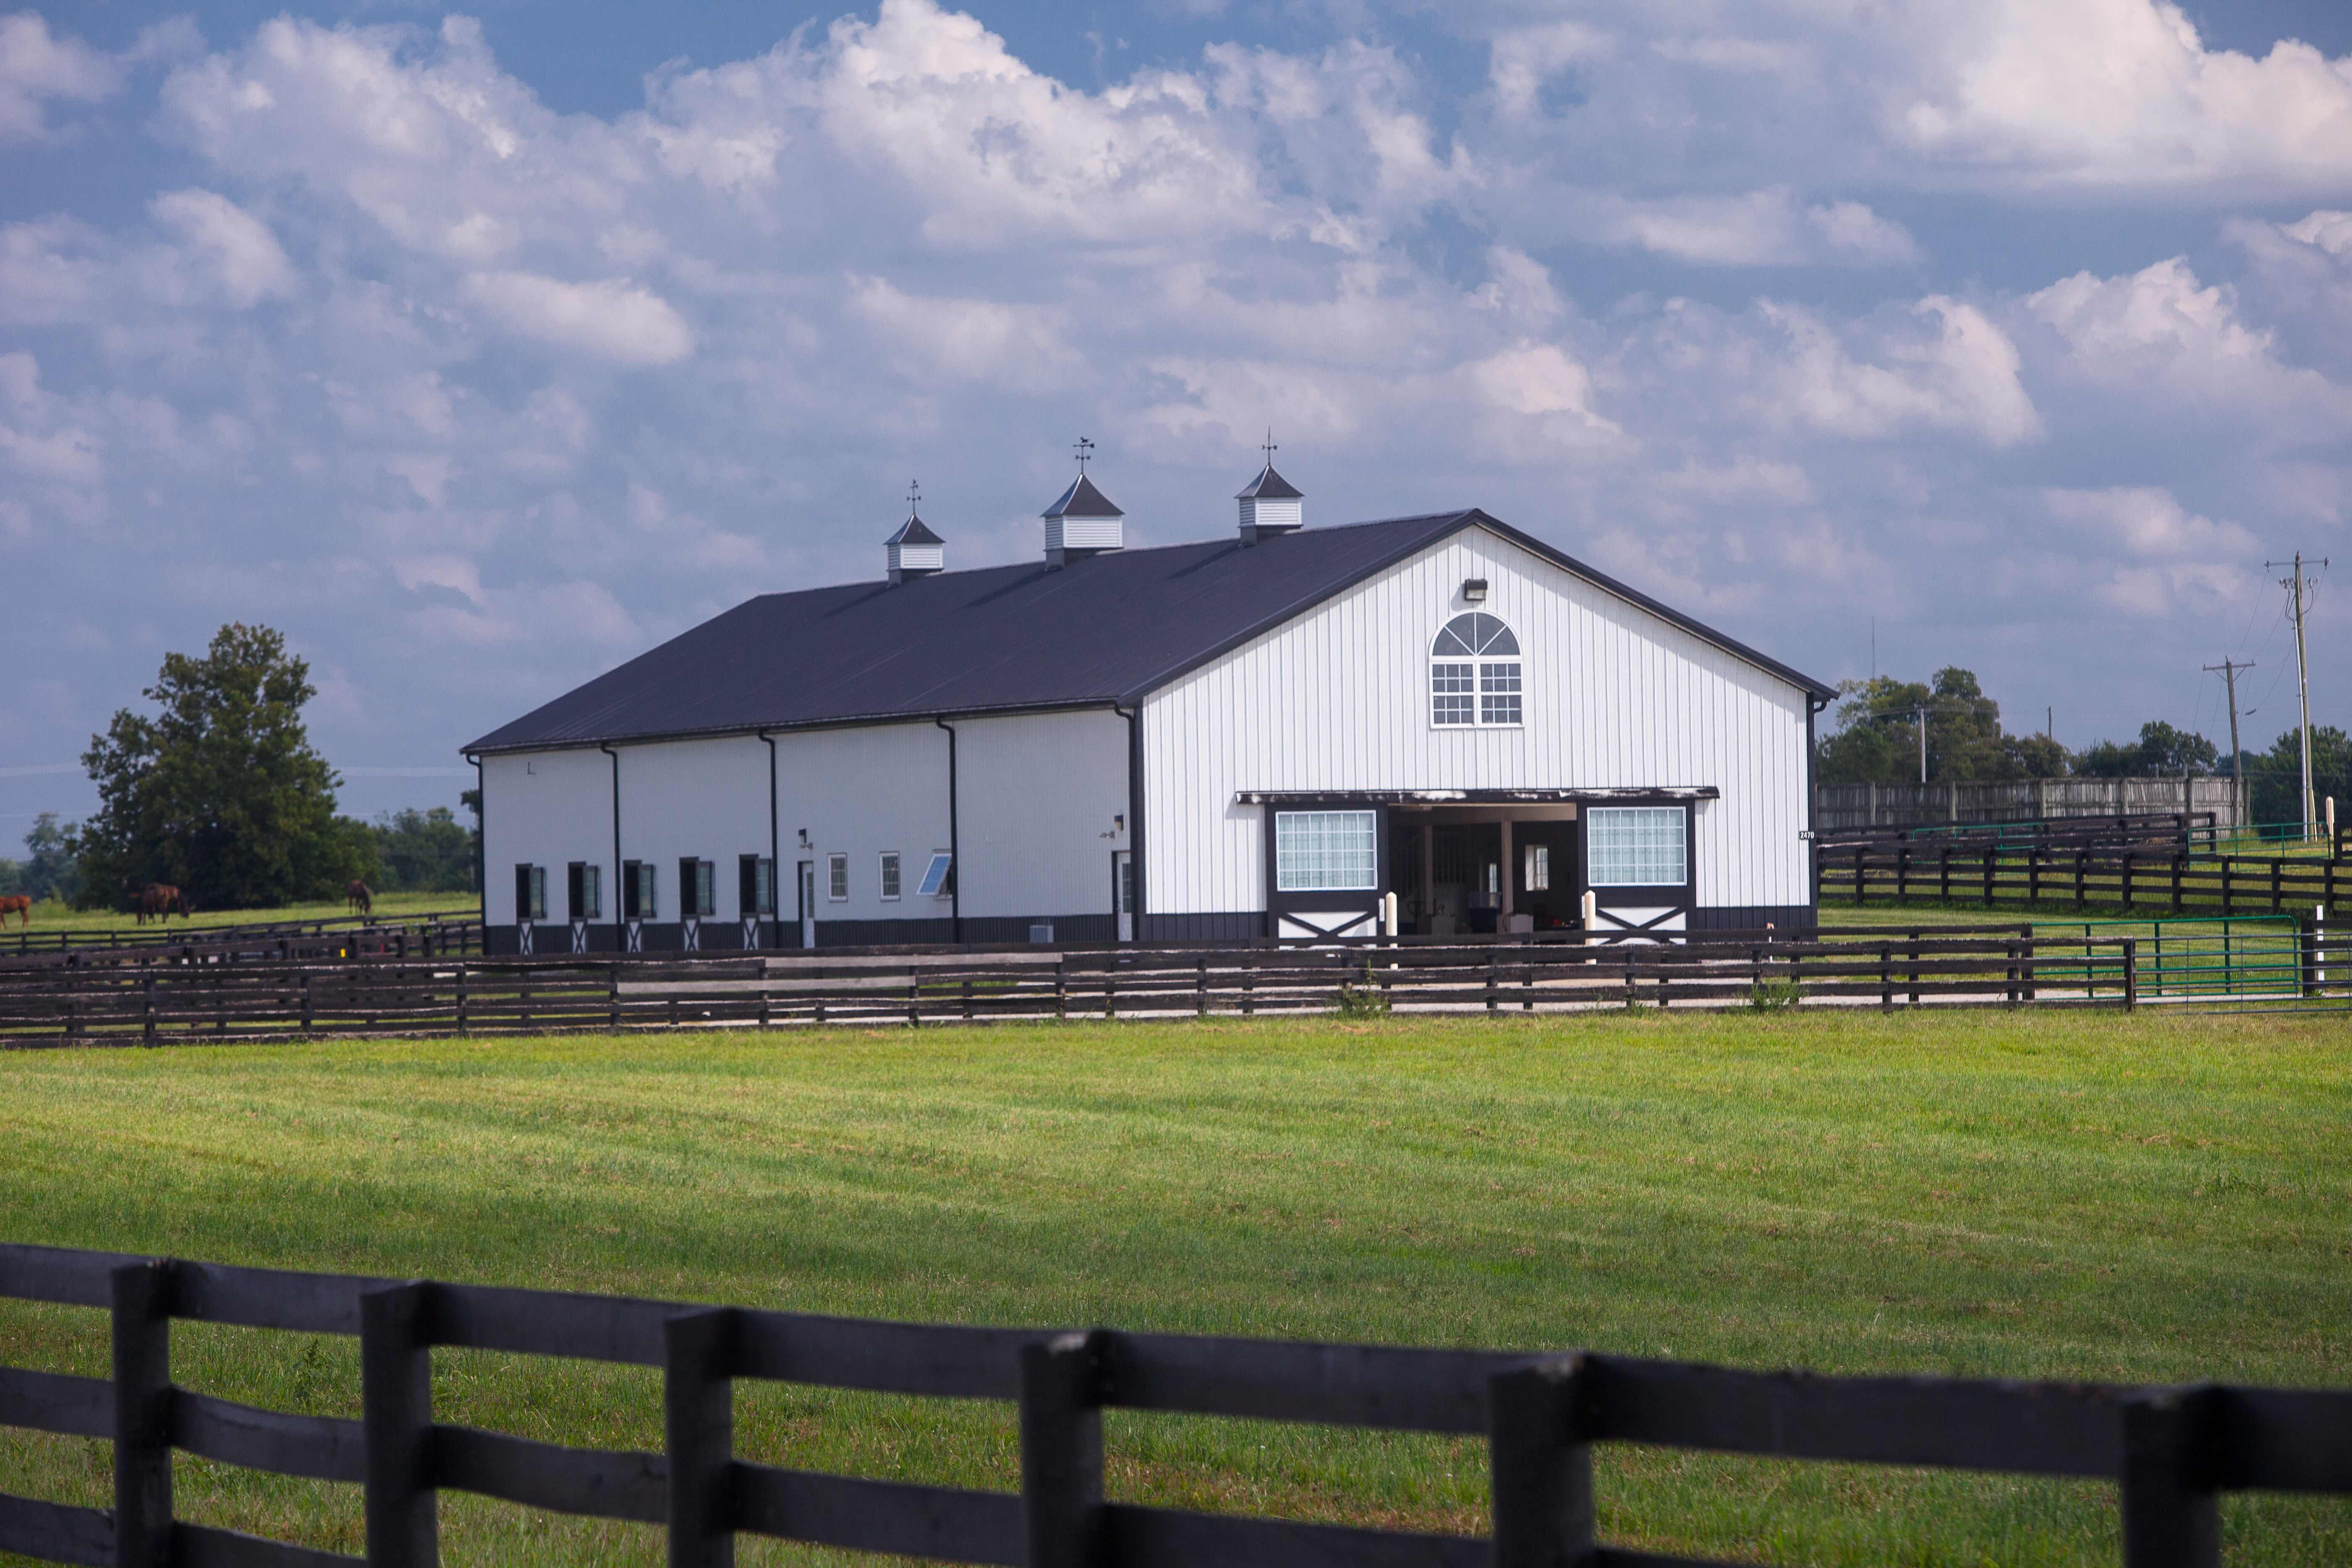 The University of Kentucky Cooperative Extension Service and Ag Equine Programs will host the annual Equine Farm and Facilities Expo June 16.